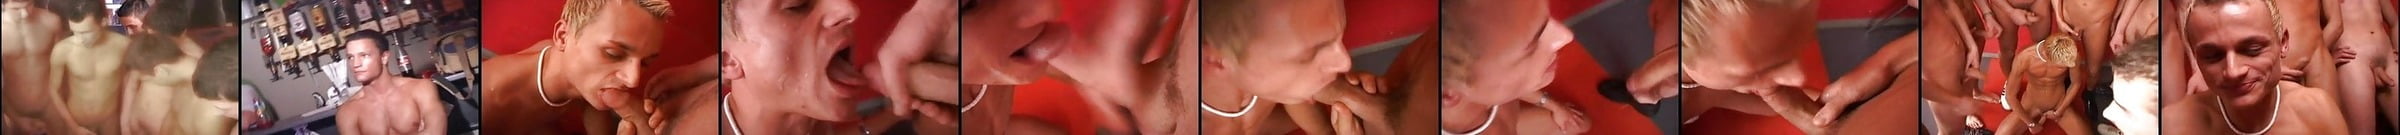 Featured Eating Cum Compilation Gay Porn Videos 2 Xhamster